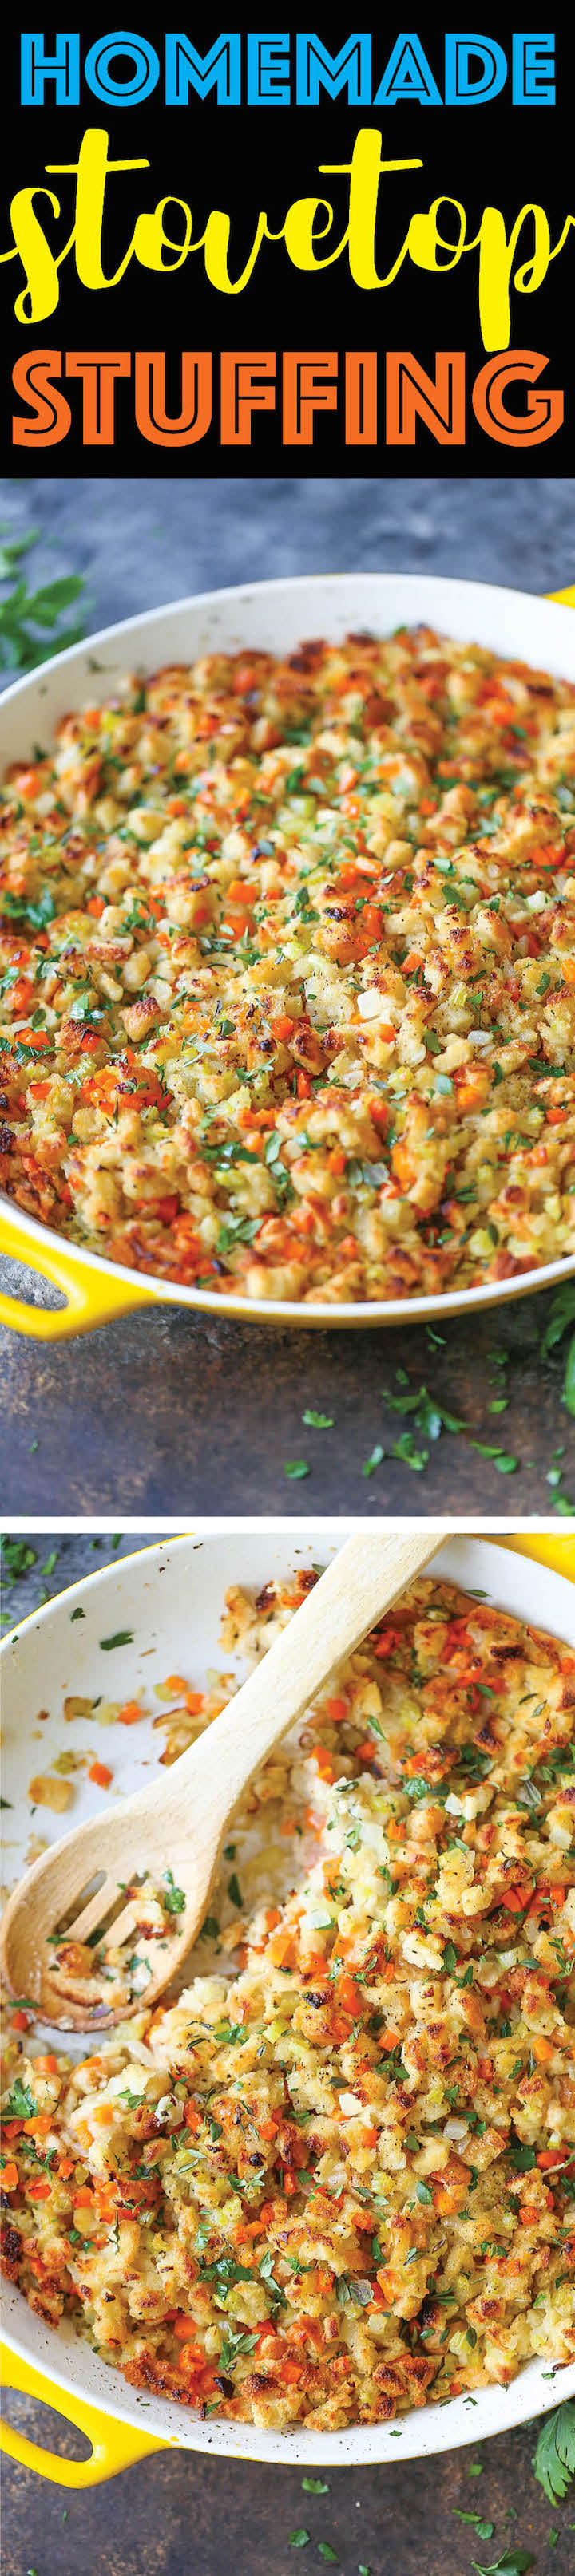 Homemade Stovetop Stuffing - Skipped the boxed stuffing and try this super EASY stovetop version instead. I promise. It tastes a million times better!